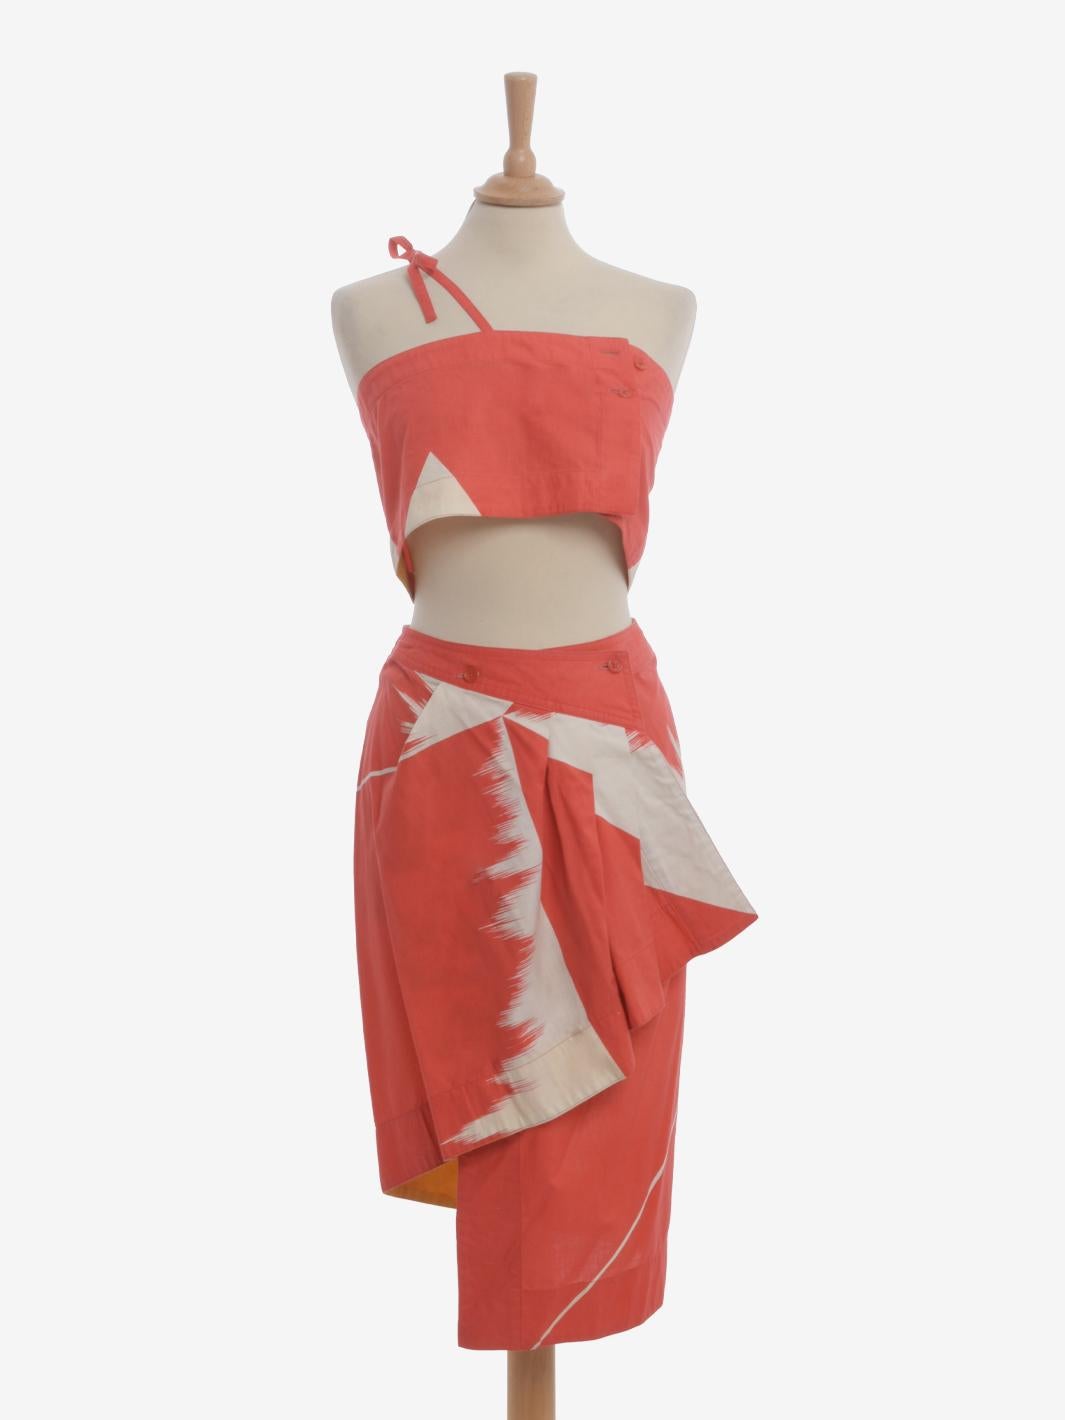 Issey Miyake Suit is a two-piece suit probably belonging to the spring collection of the late 1970s. the garment consists of a bandeau top with two-button fastening and single crossed shoulder straps and an asymmetrical pencil skirt with a